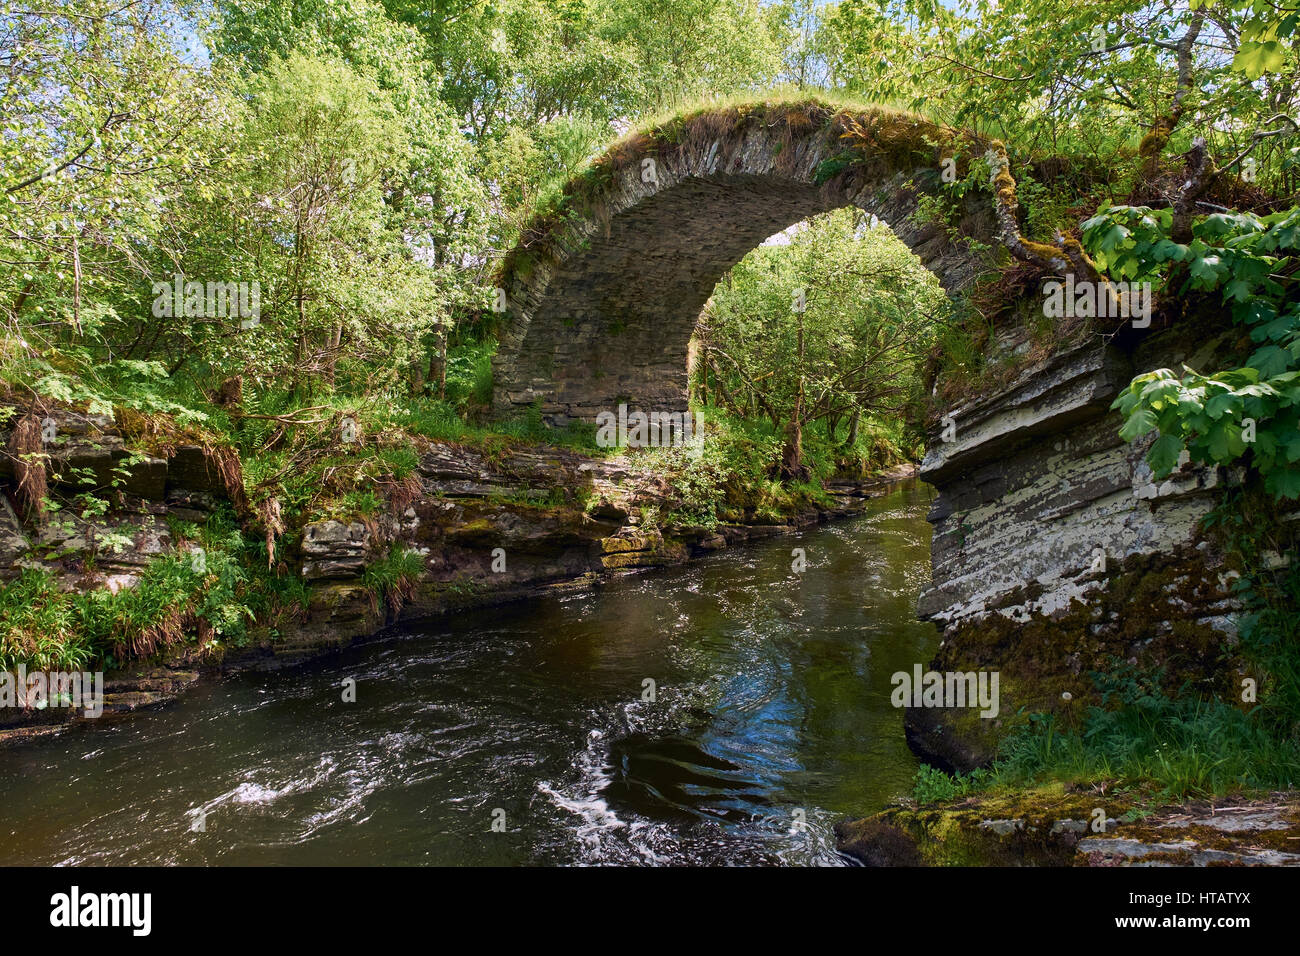 The remains of The Old Bridge of Livet that crosses the river Livet in the Scottish Highlands.UK. Stock Photo